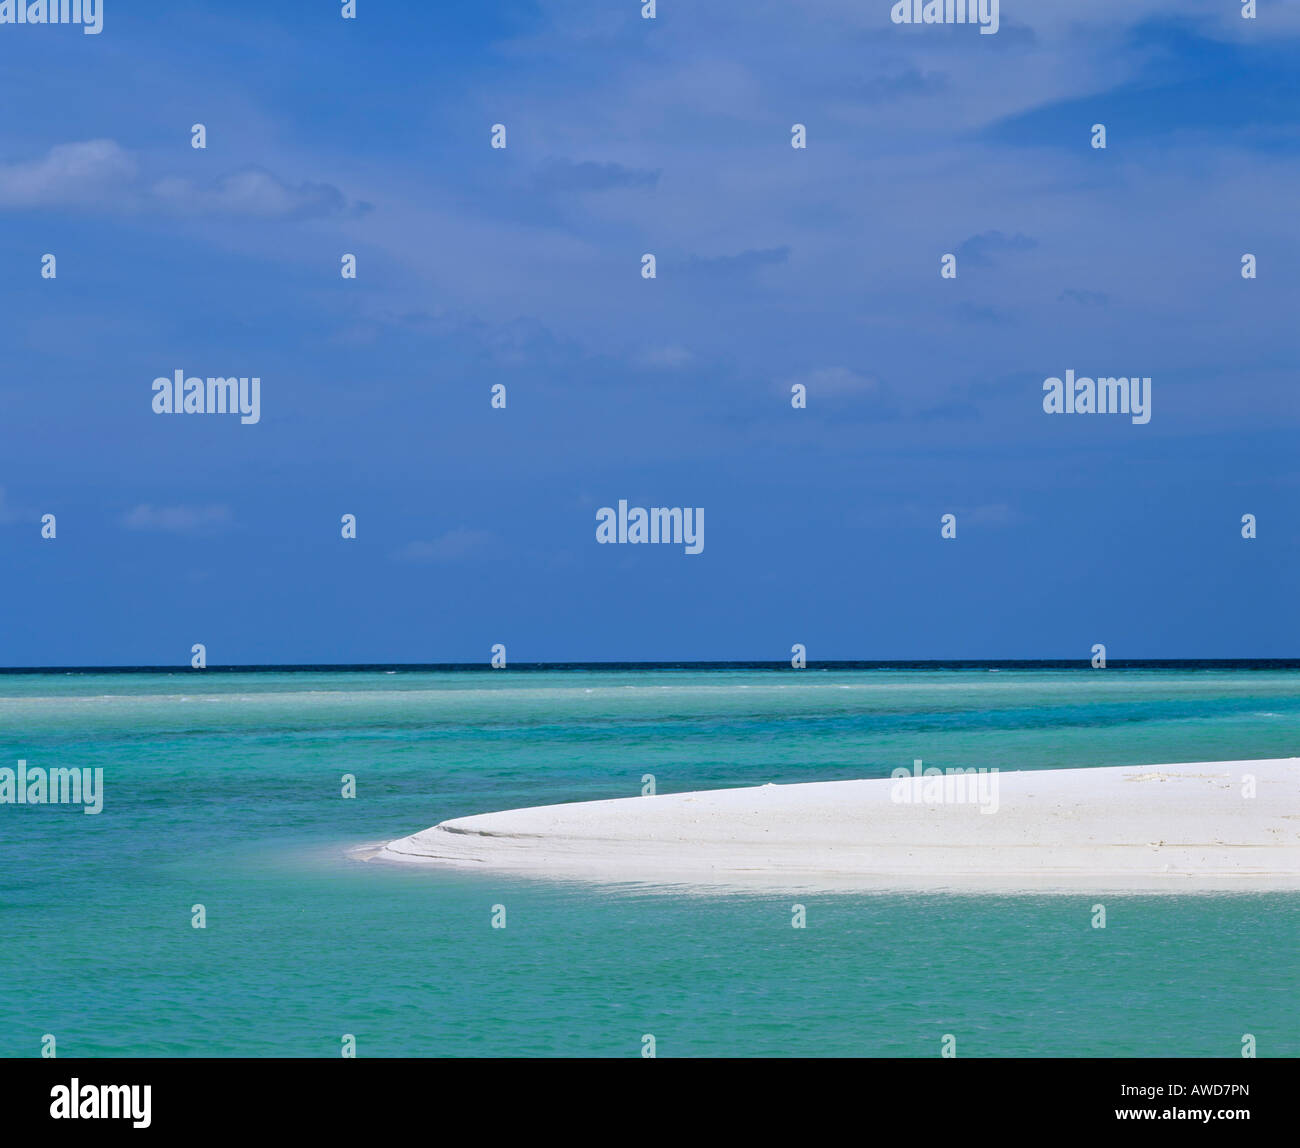 Sand bank, lagoon, turquoise waters, Maldives, Indian Ocean Stock Photo